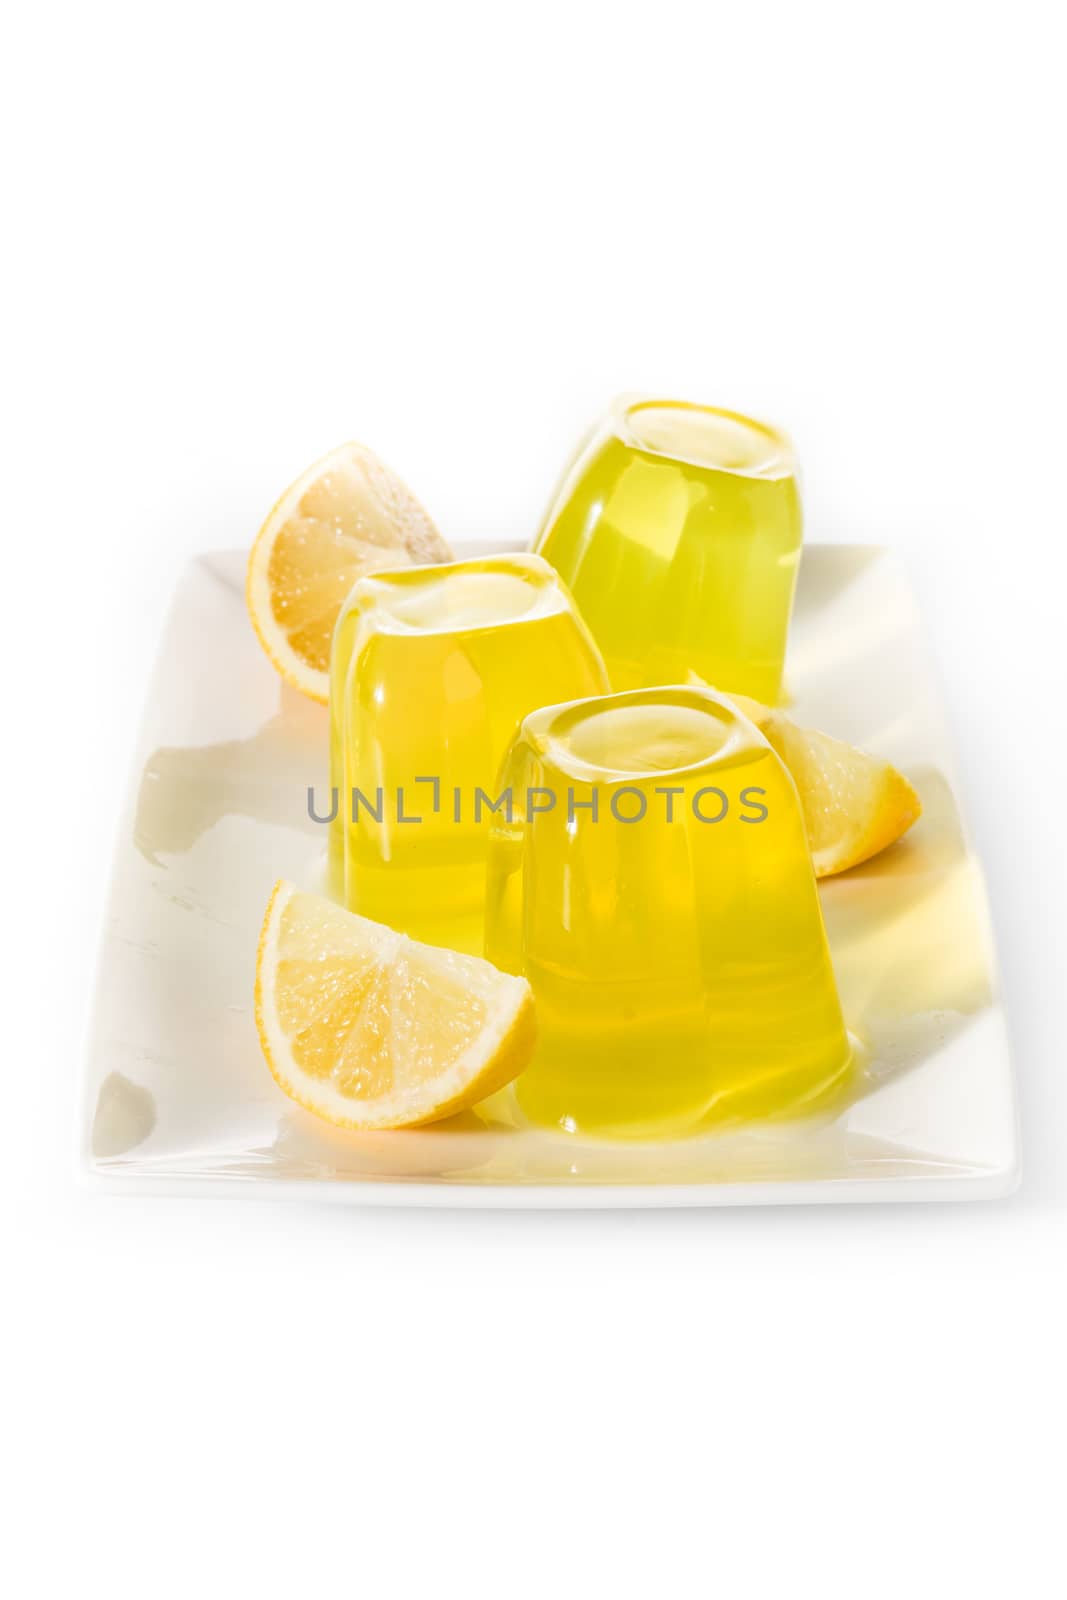 Lemon jellies on a plastic cup  by chandlervid85